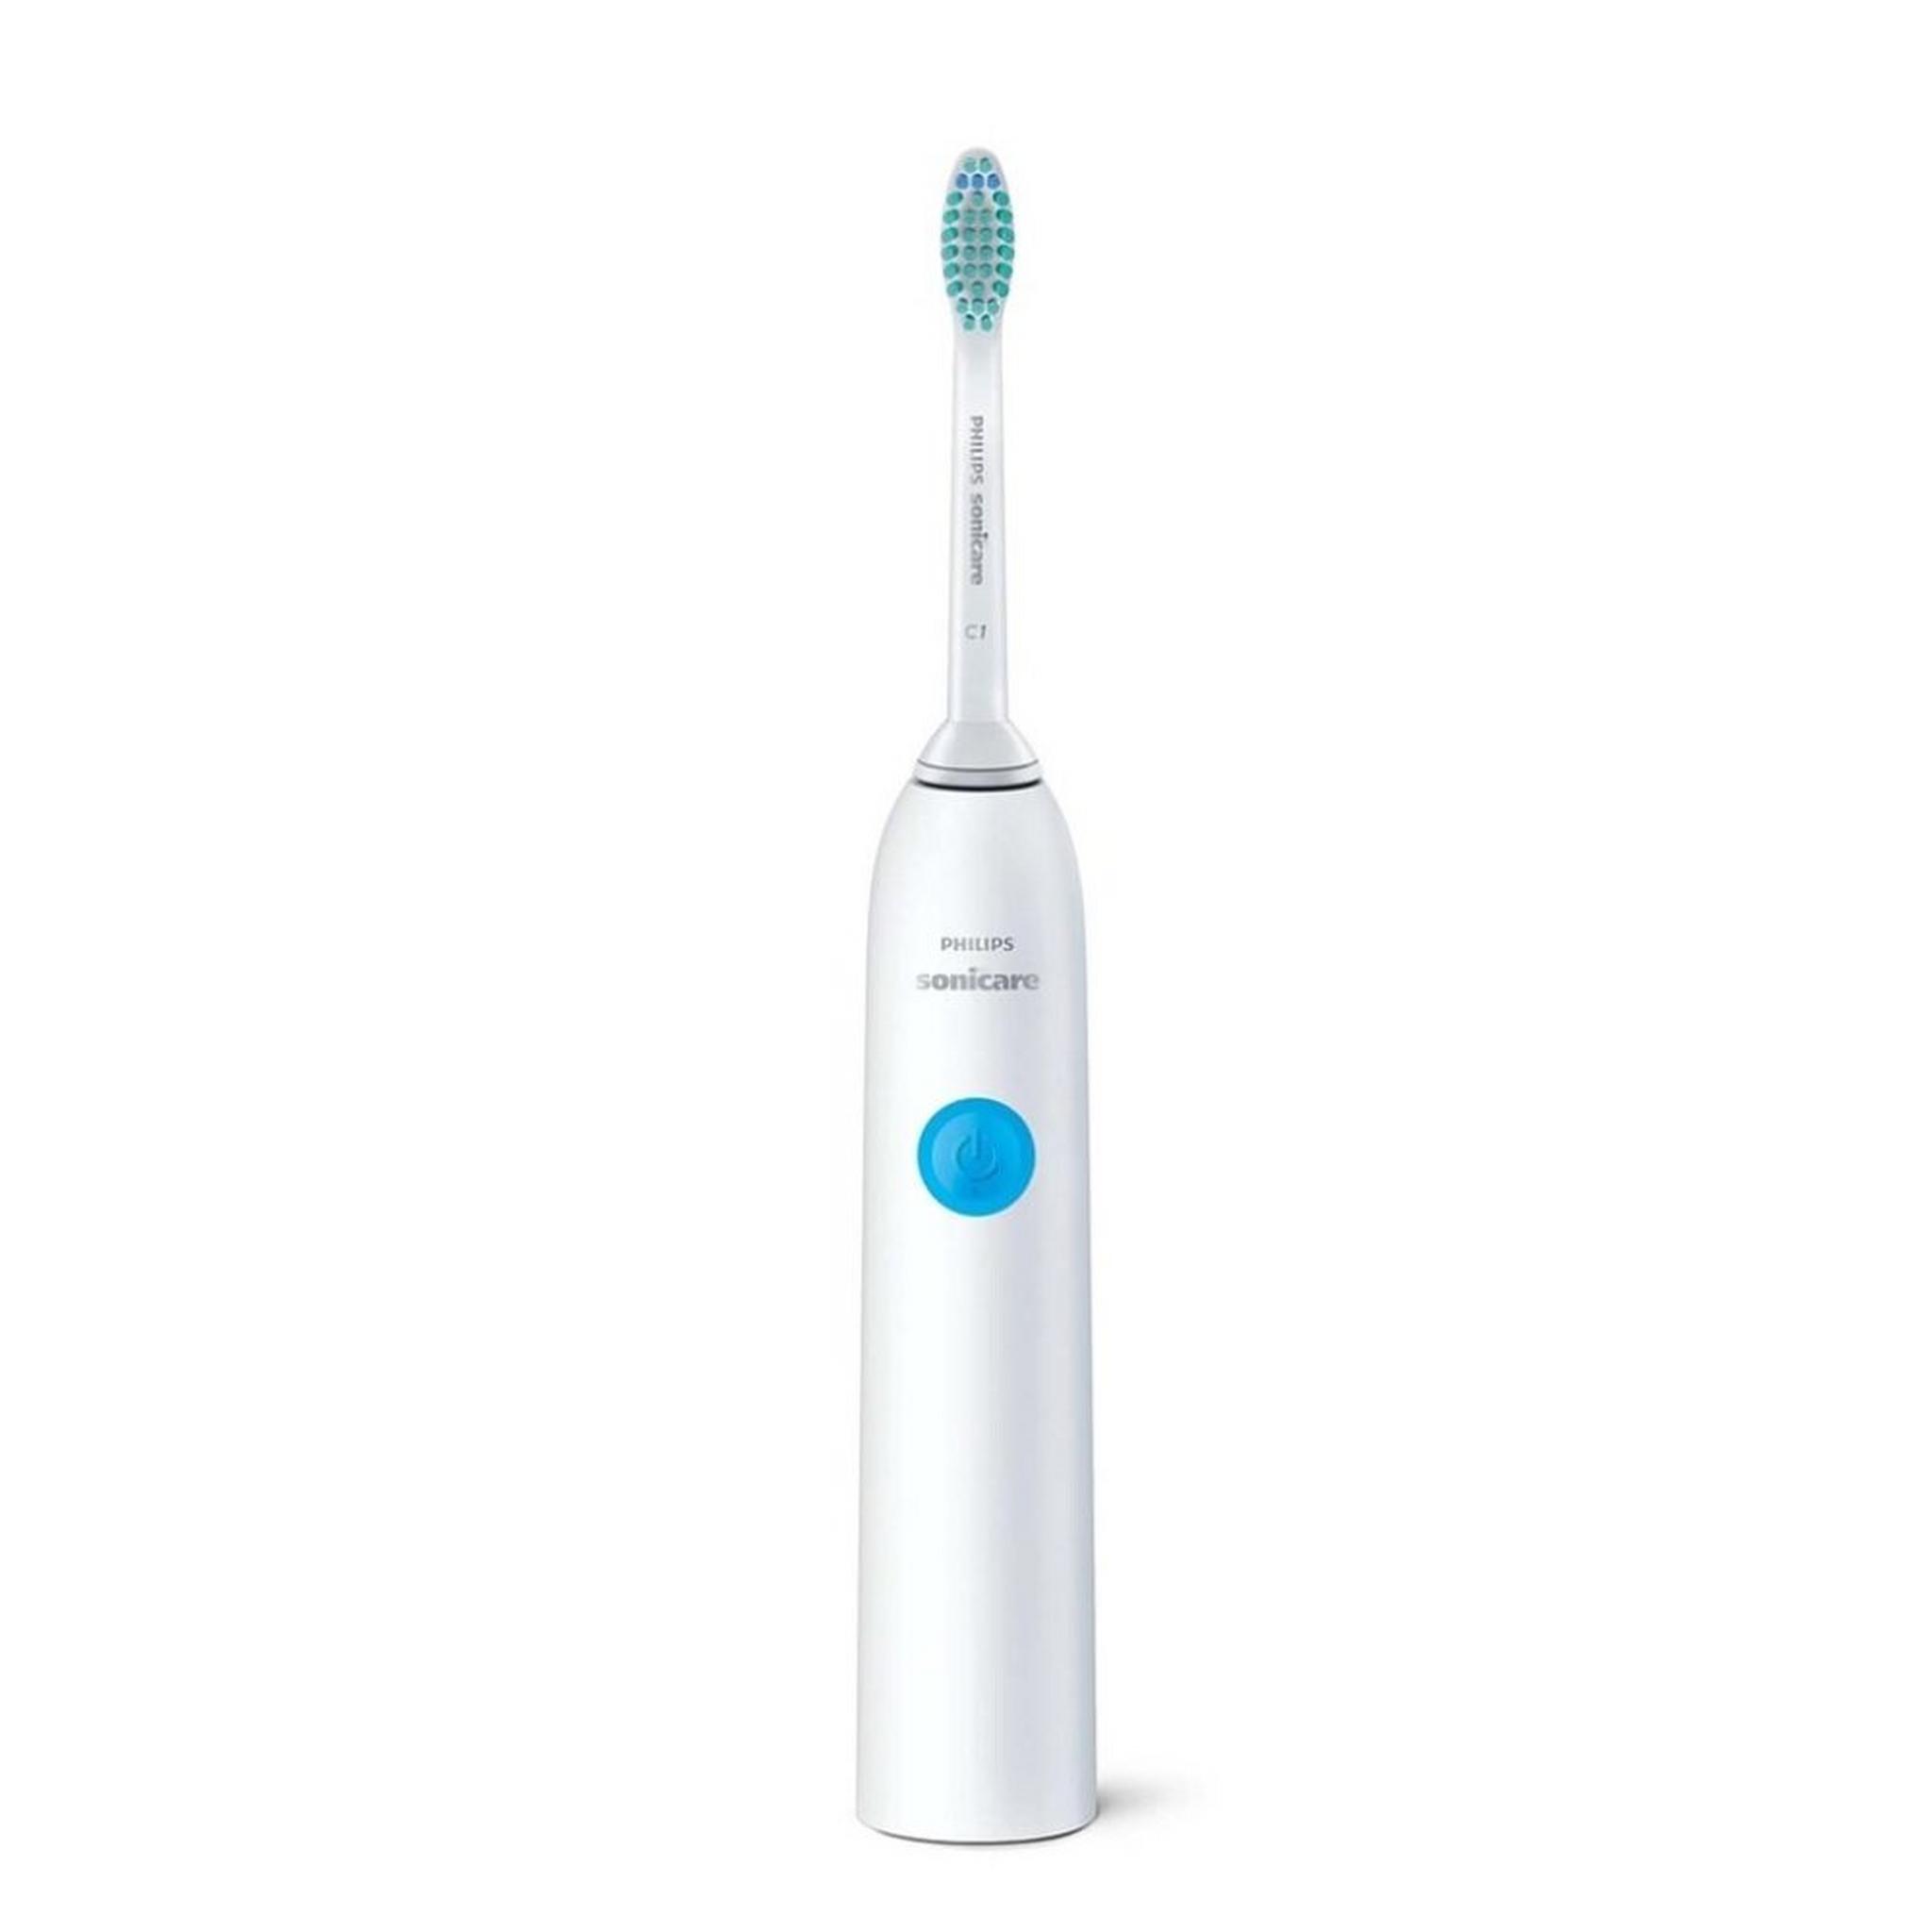 Philips Sonicare Daily Clean Toothbrush (HX3415/07)